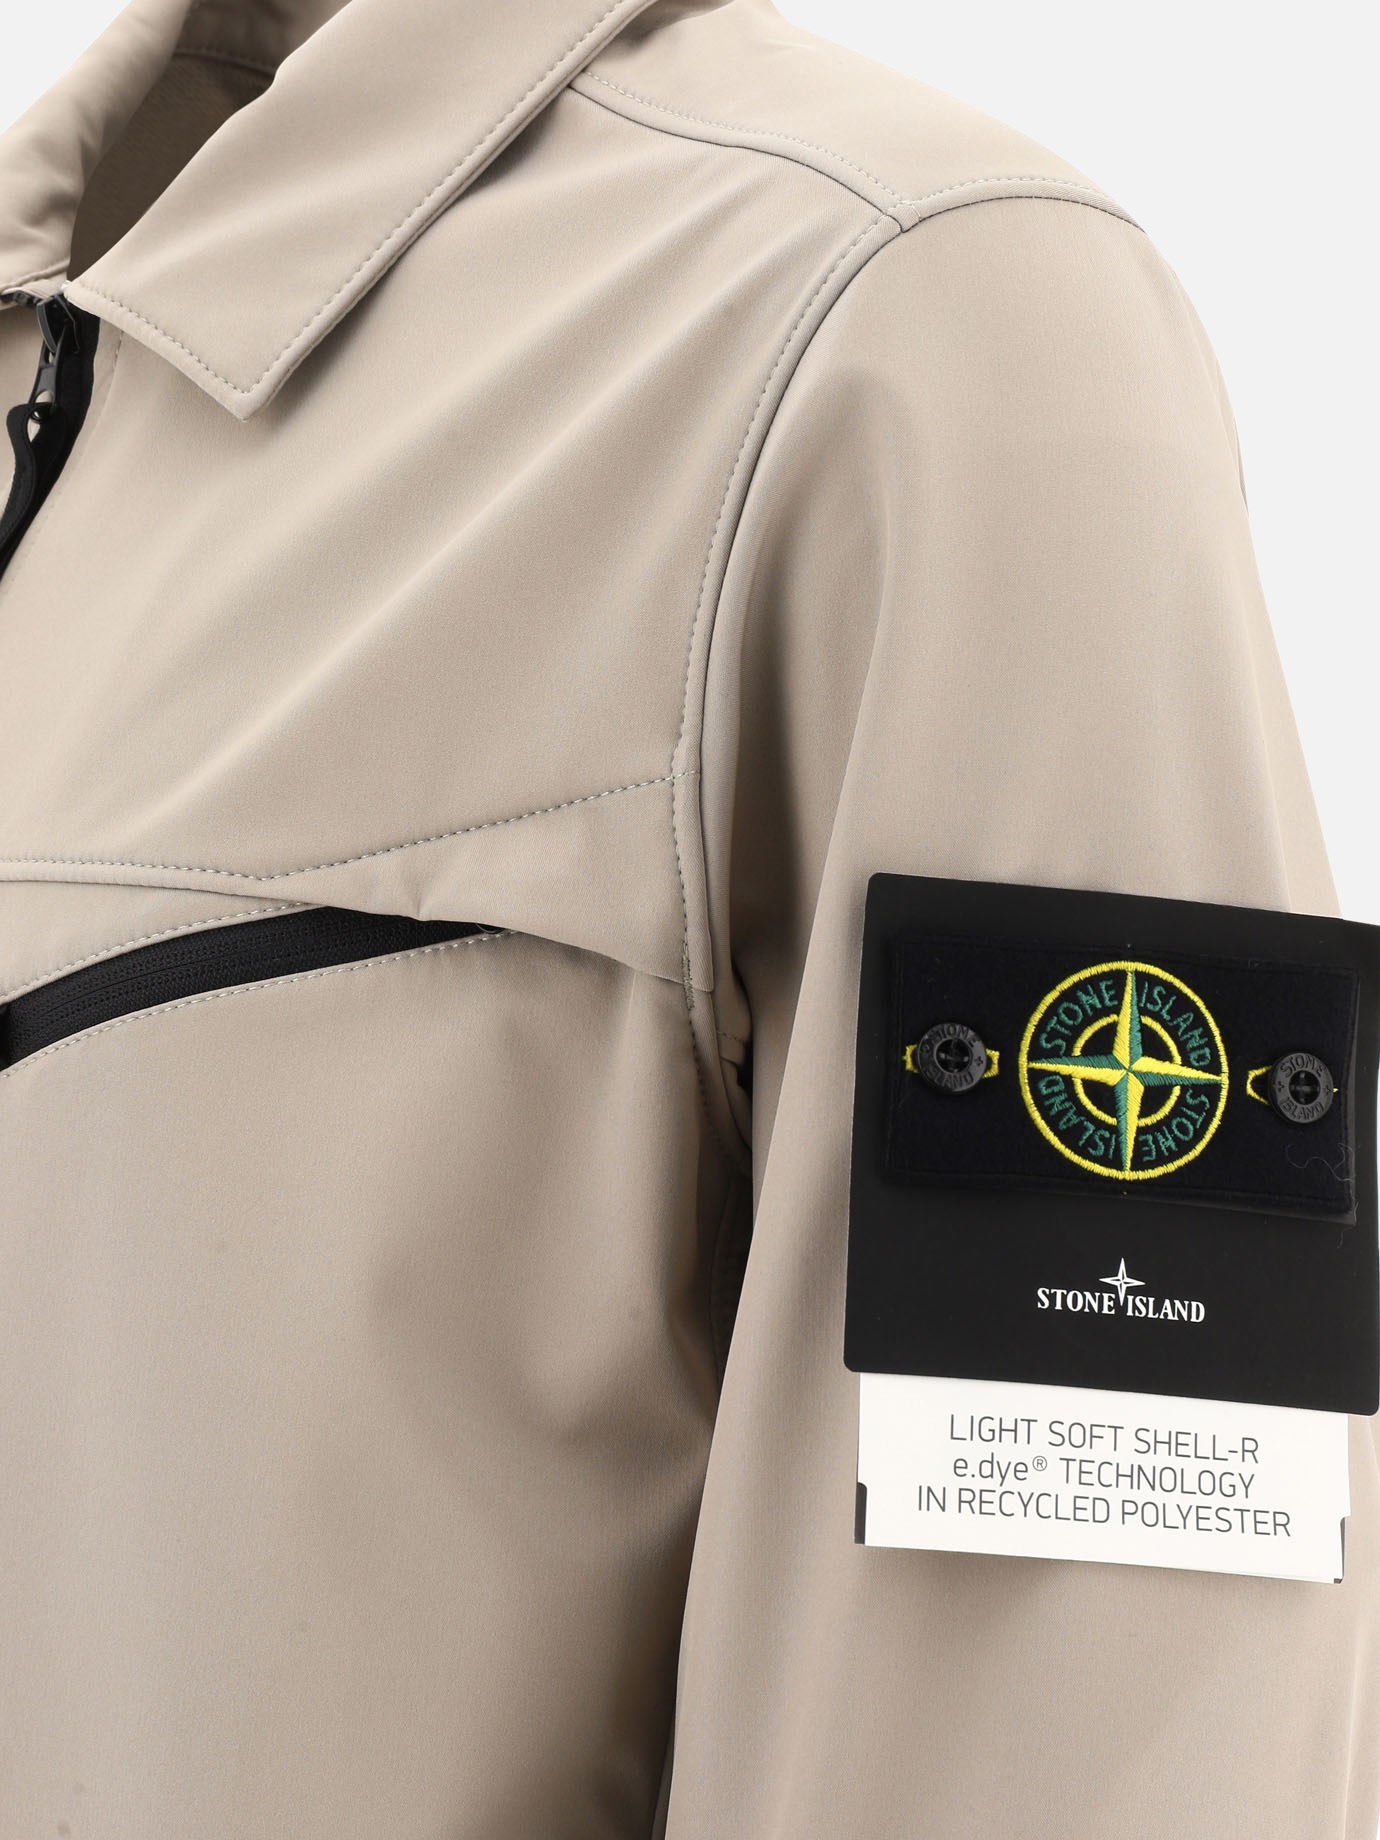 Giacca  Light Soft Shell-R  by Stone Island